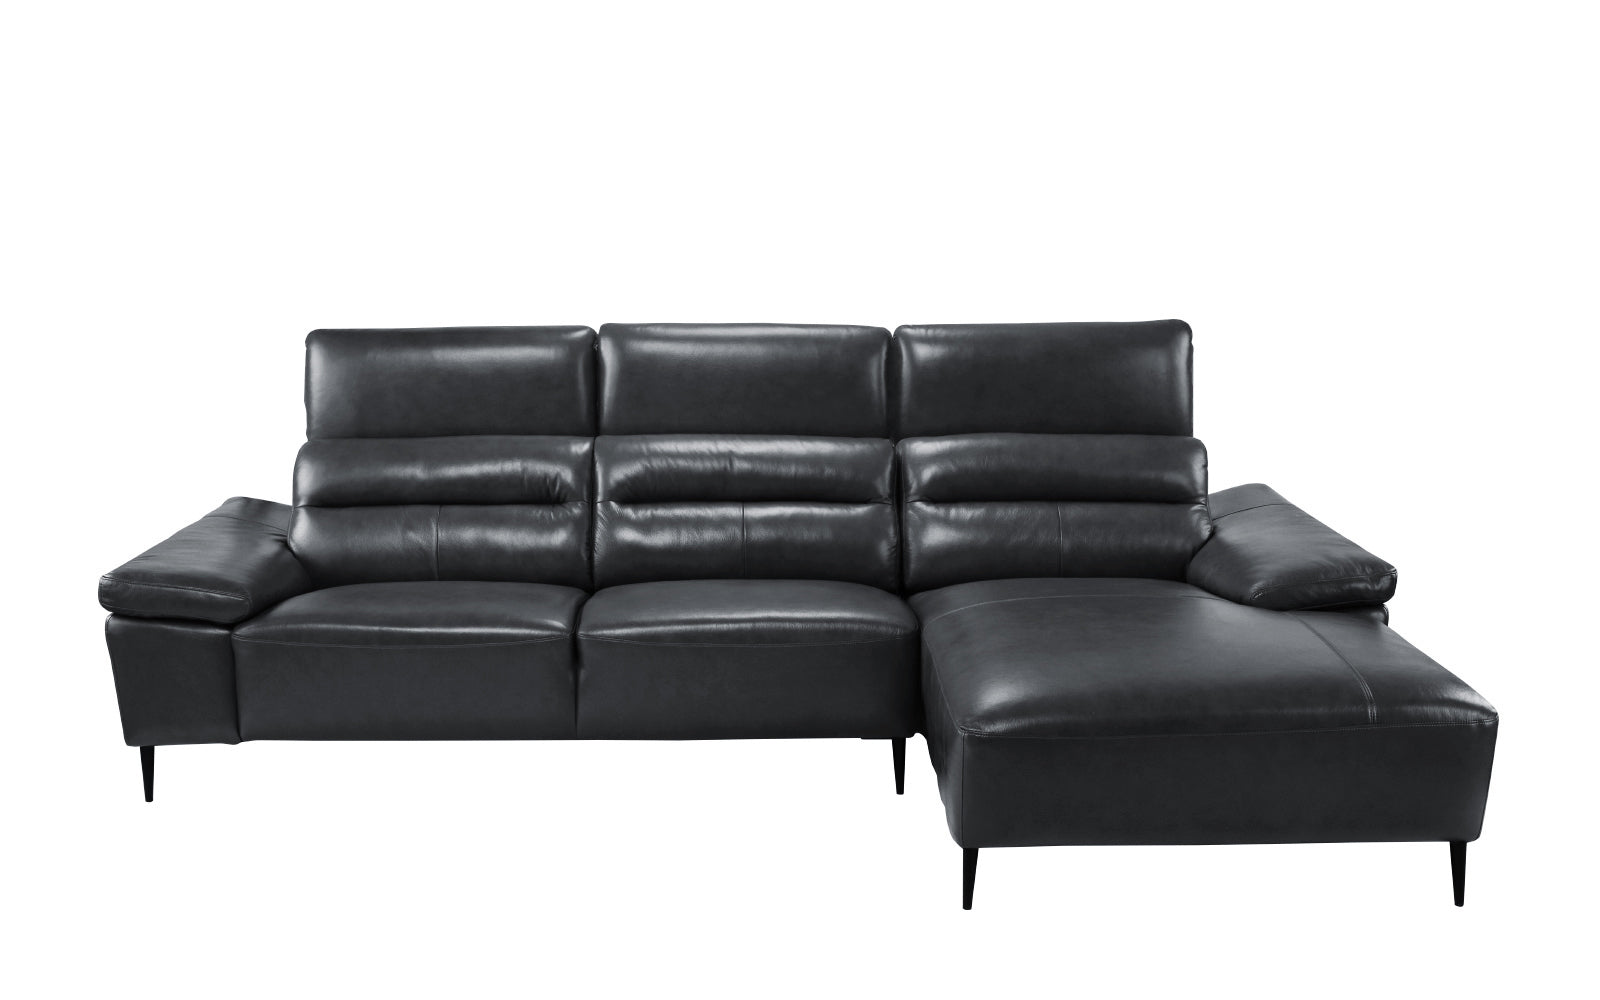 Rocco 70s-inspired Leather Match Sectional Sofa With Right Chaise